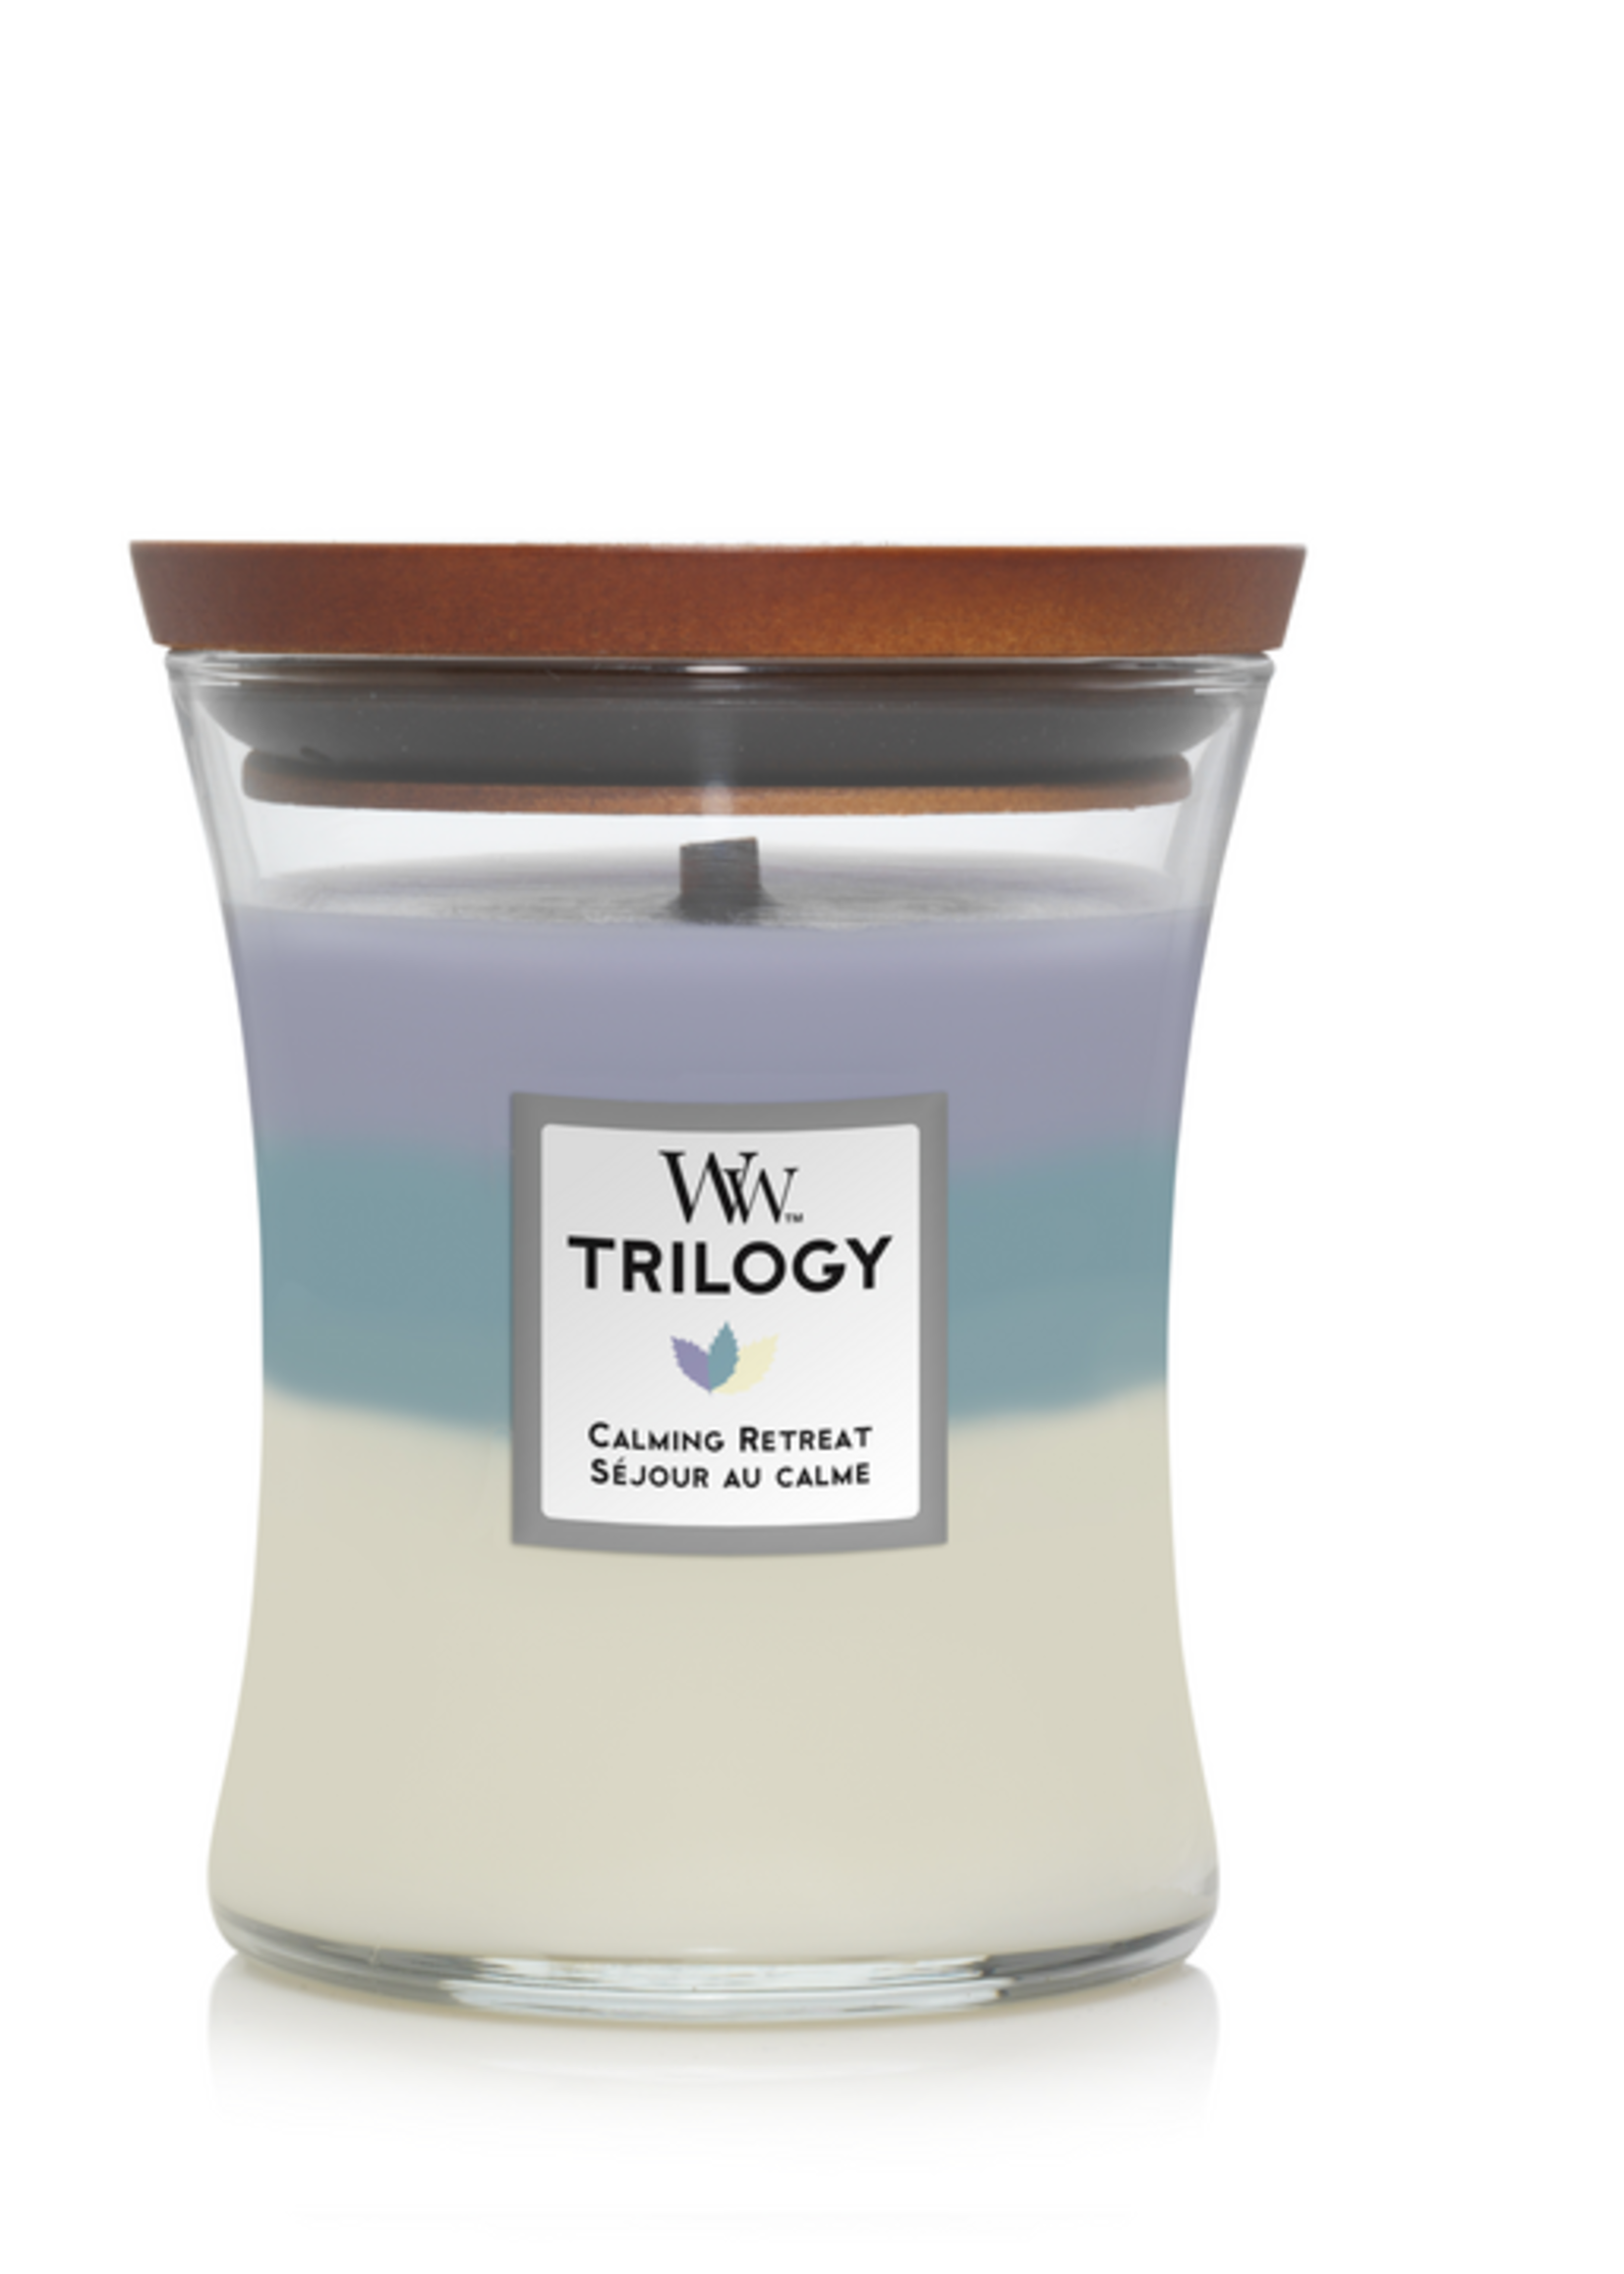 Woodwick Trilogy calming retreat candle